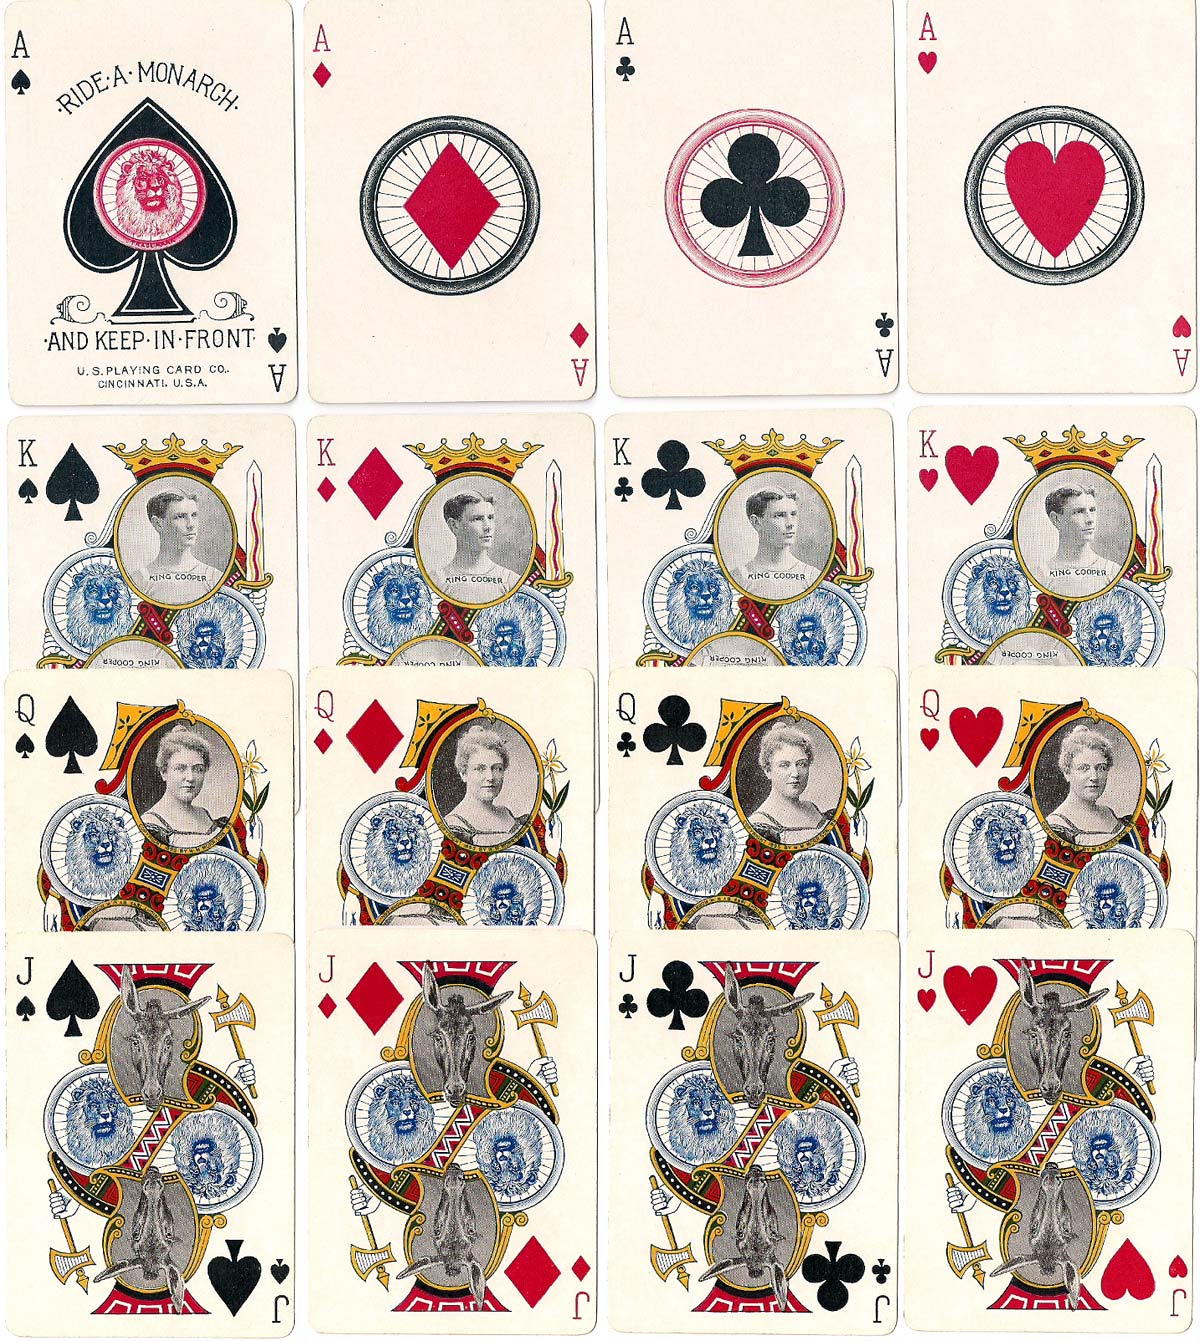 Monarch Bicycle playing cards manufactured by U.S.P.C.C. in 1895